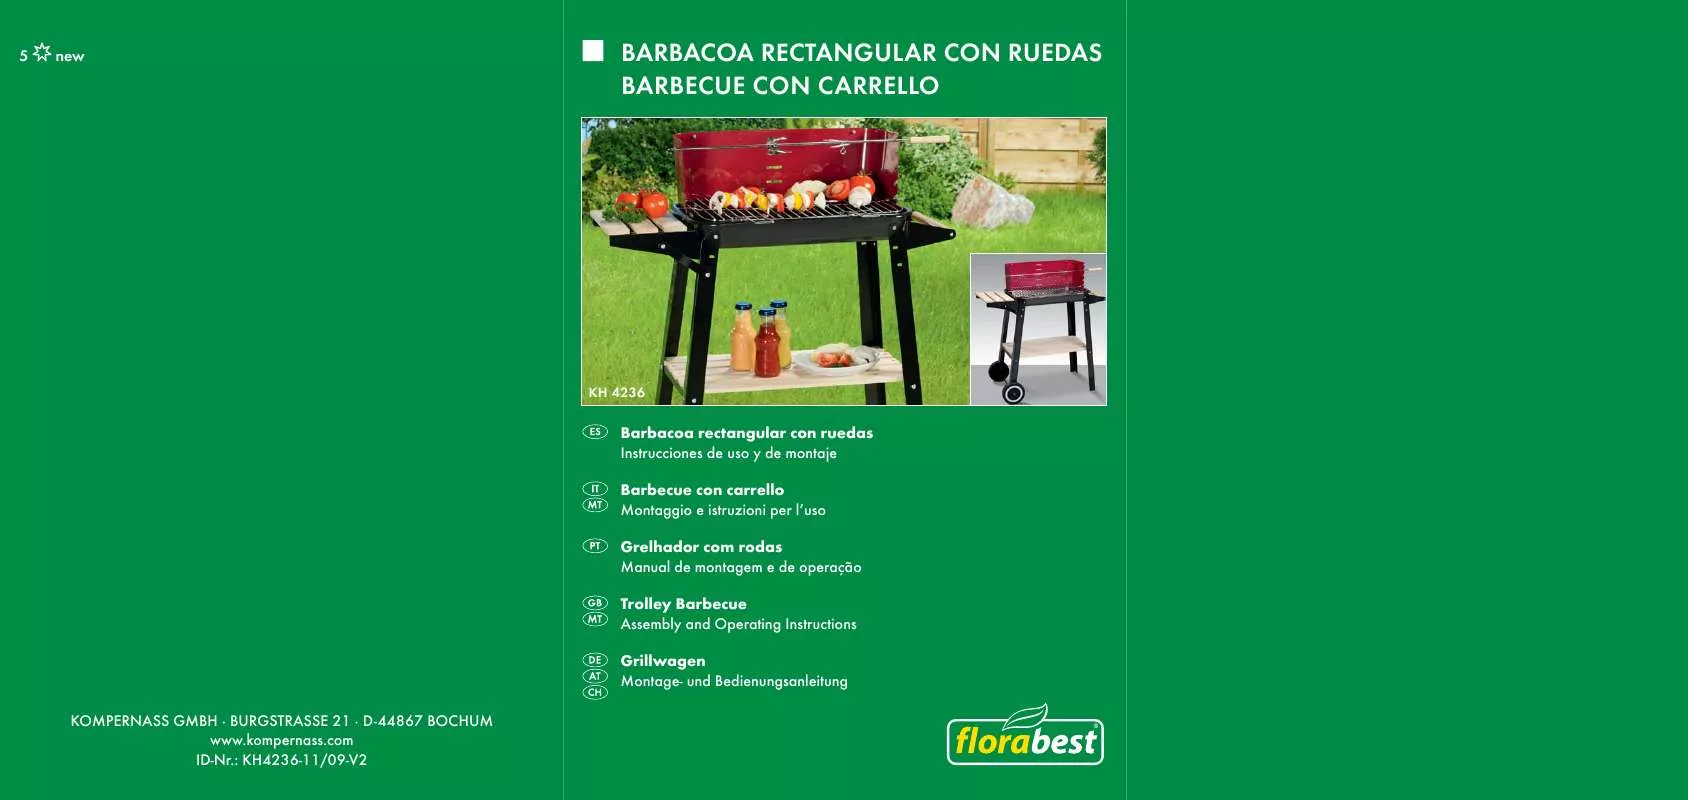 Mode d'emploi FLORABEST KH 4236 TROLLEY BARBECUE